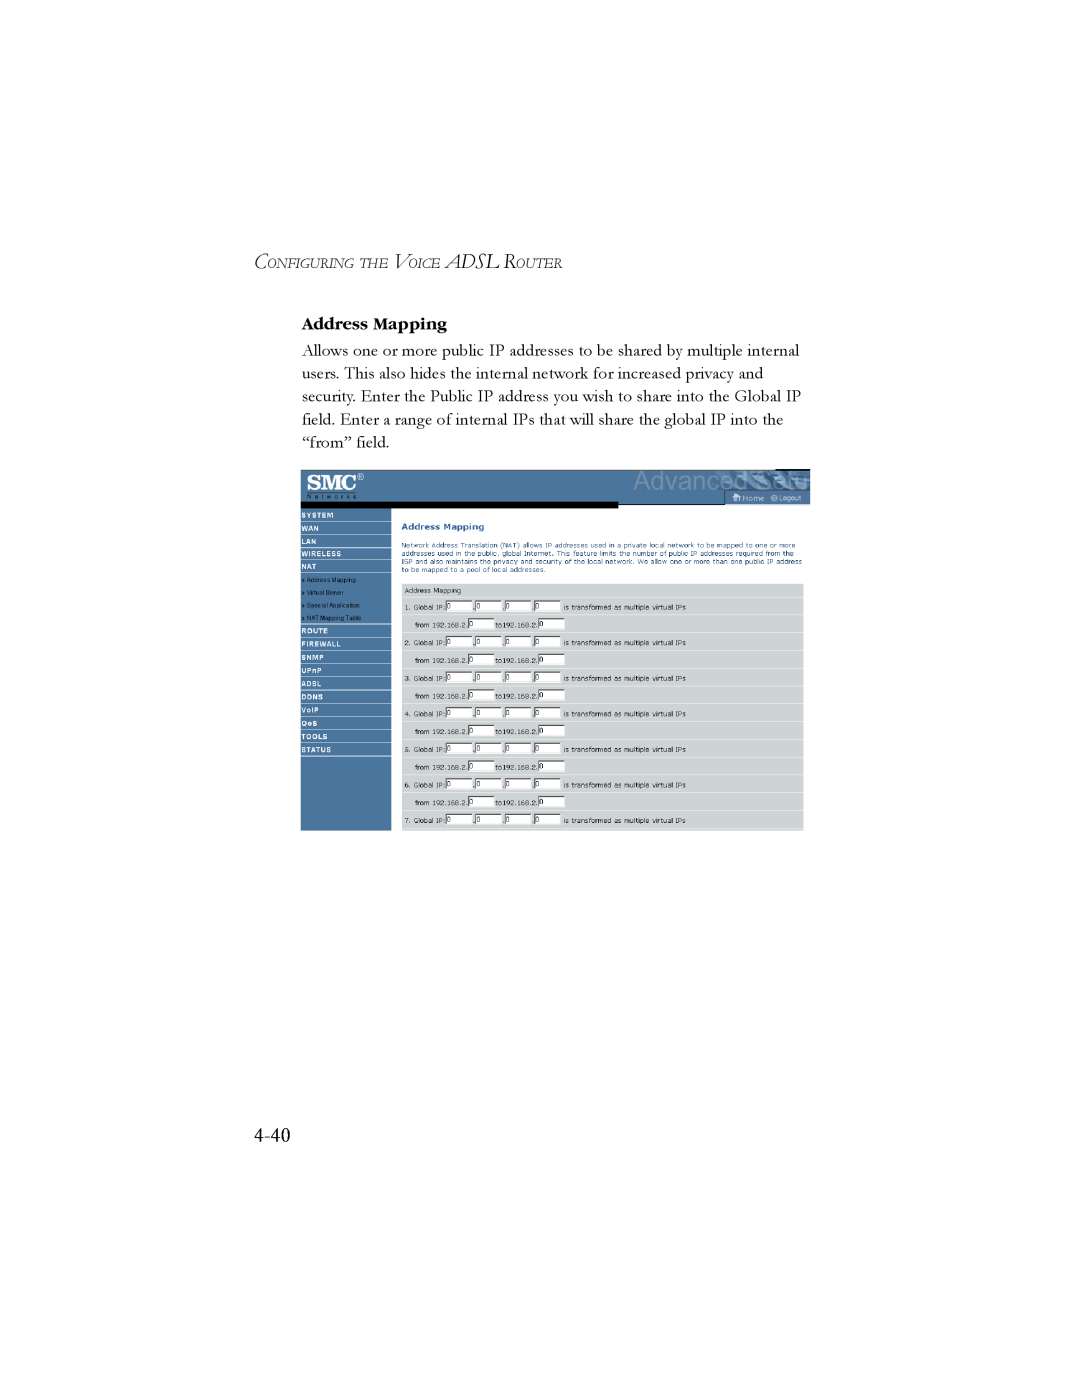 SMC Networks SMC7908VoWBRA manual 4-40, Address Mapping, Configuring The Voice Adsl Router 